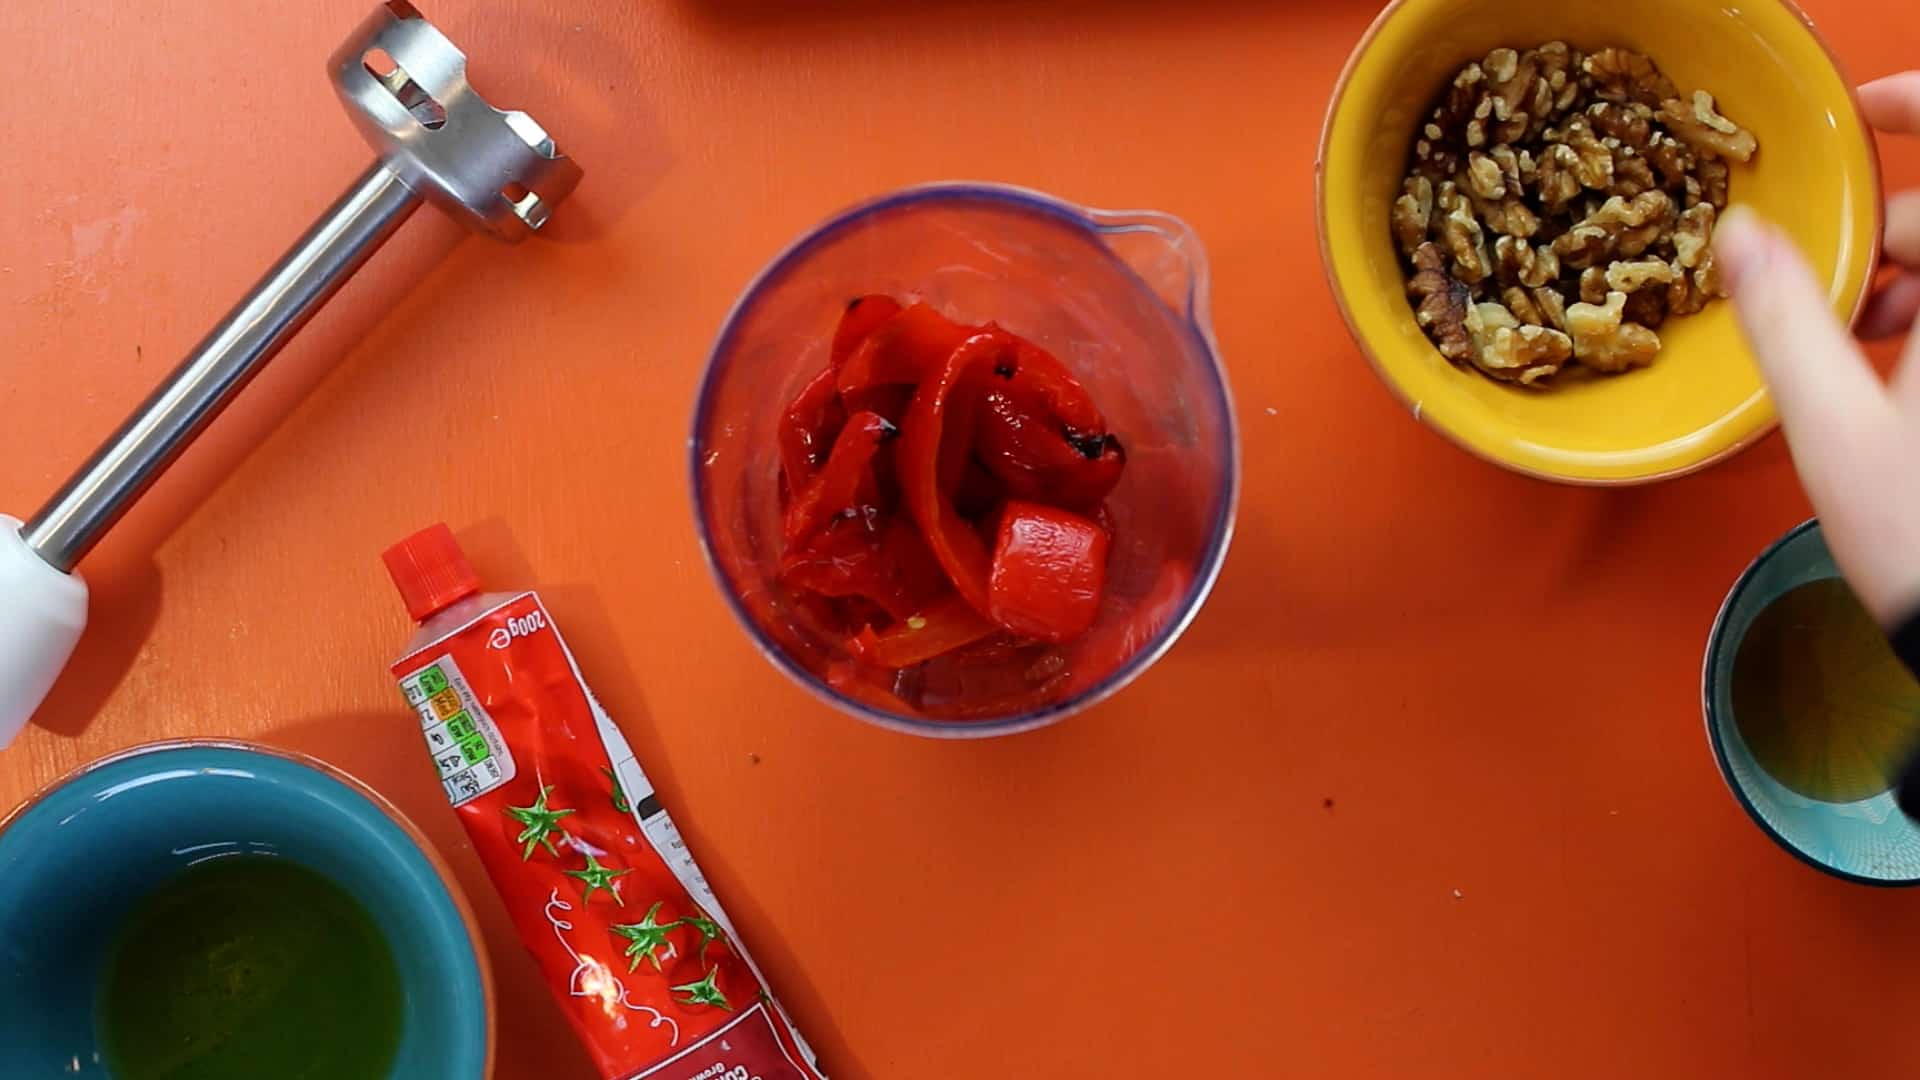 Roasted red peppers in a blended cup with walnuts in a bowl and tomato paste in tube and hand blender on an orange background.